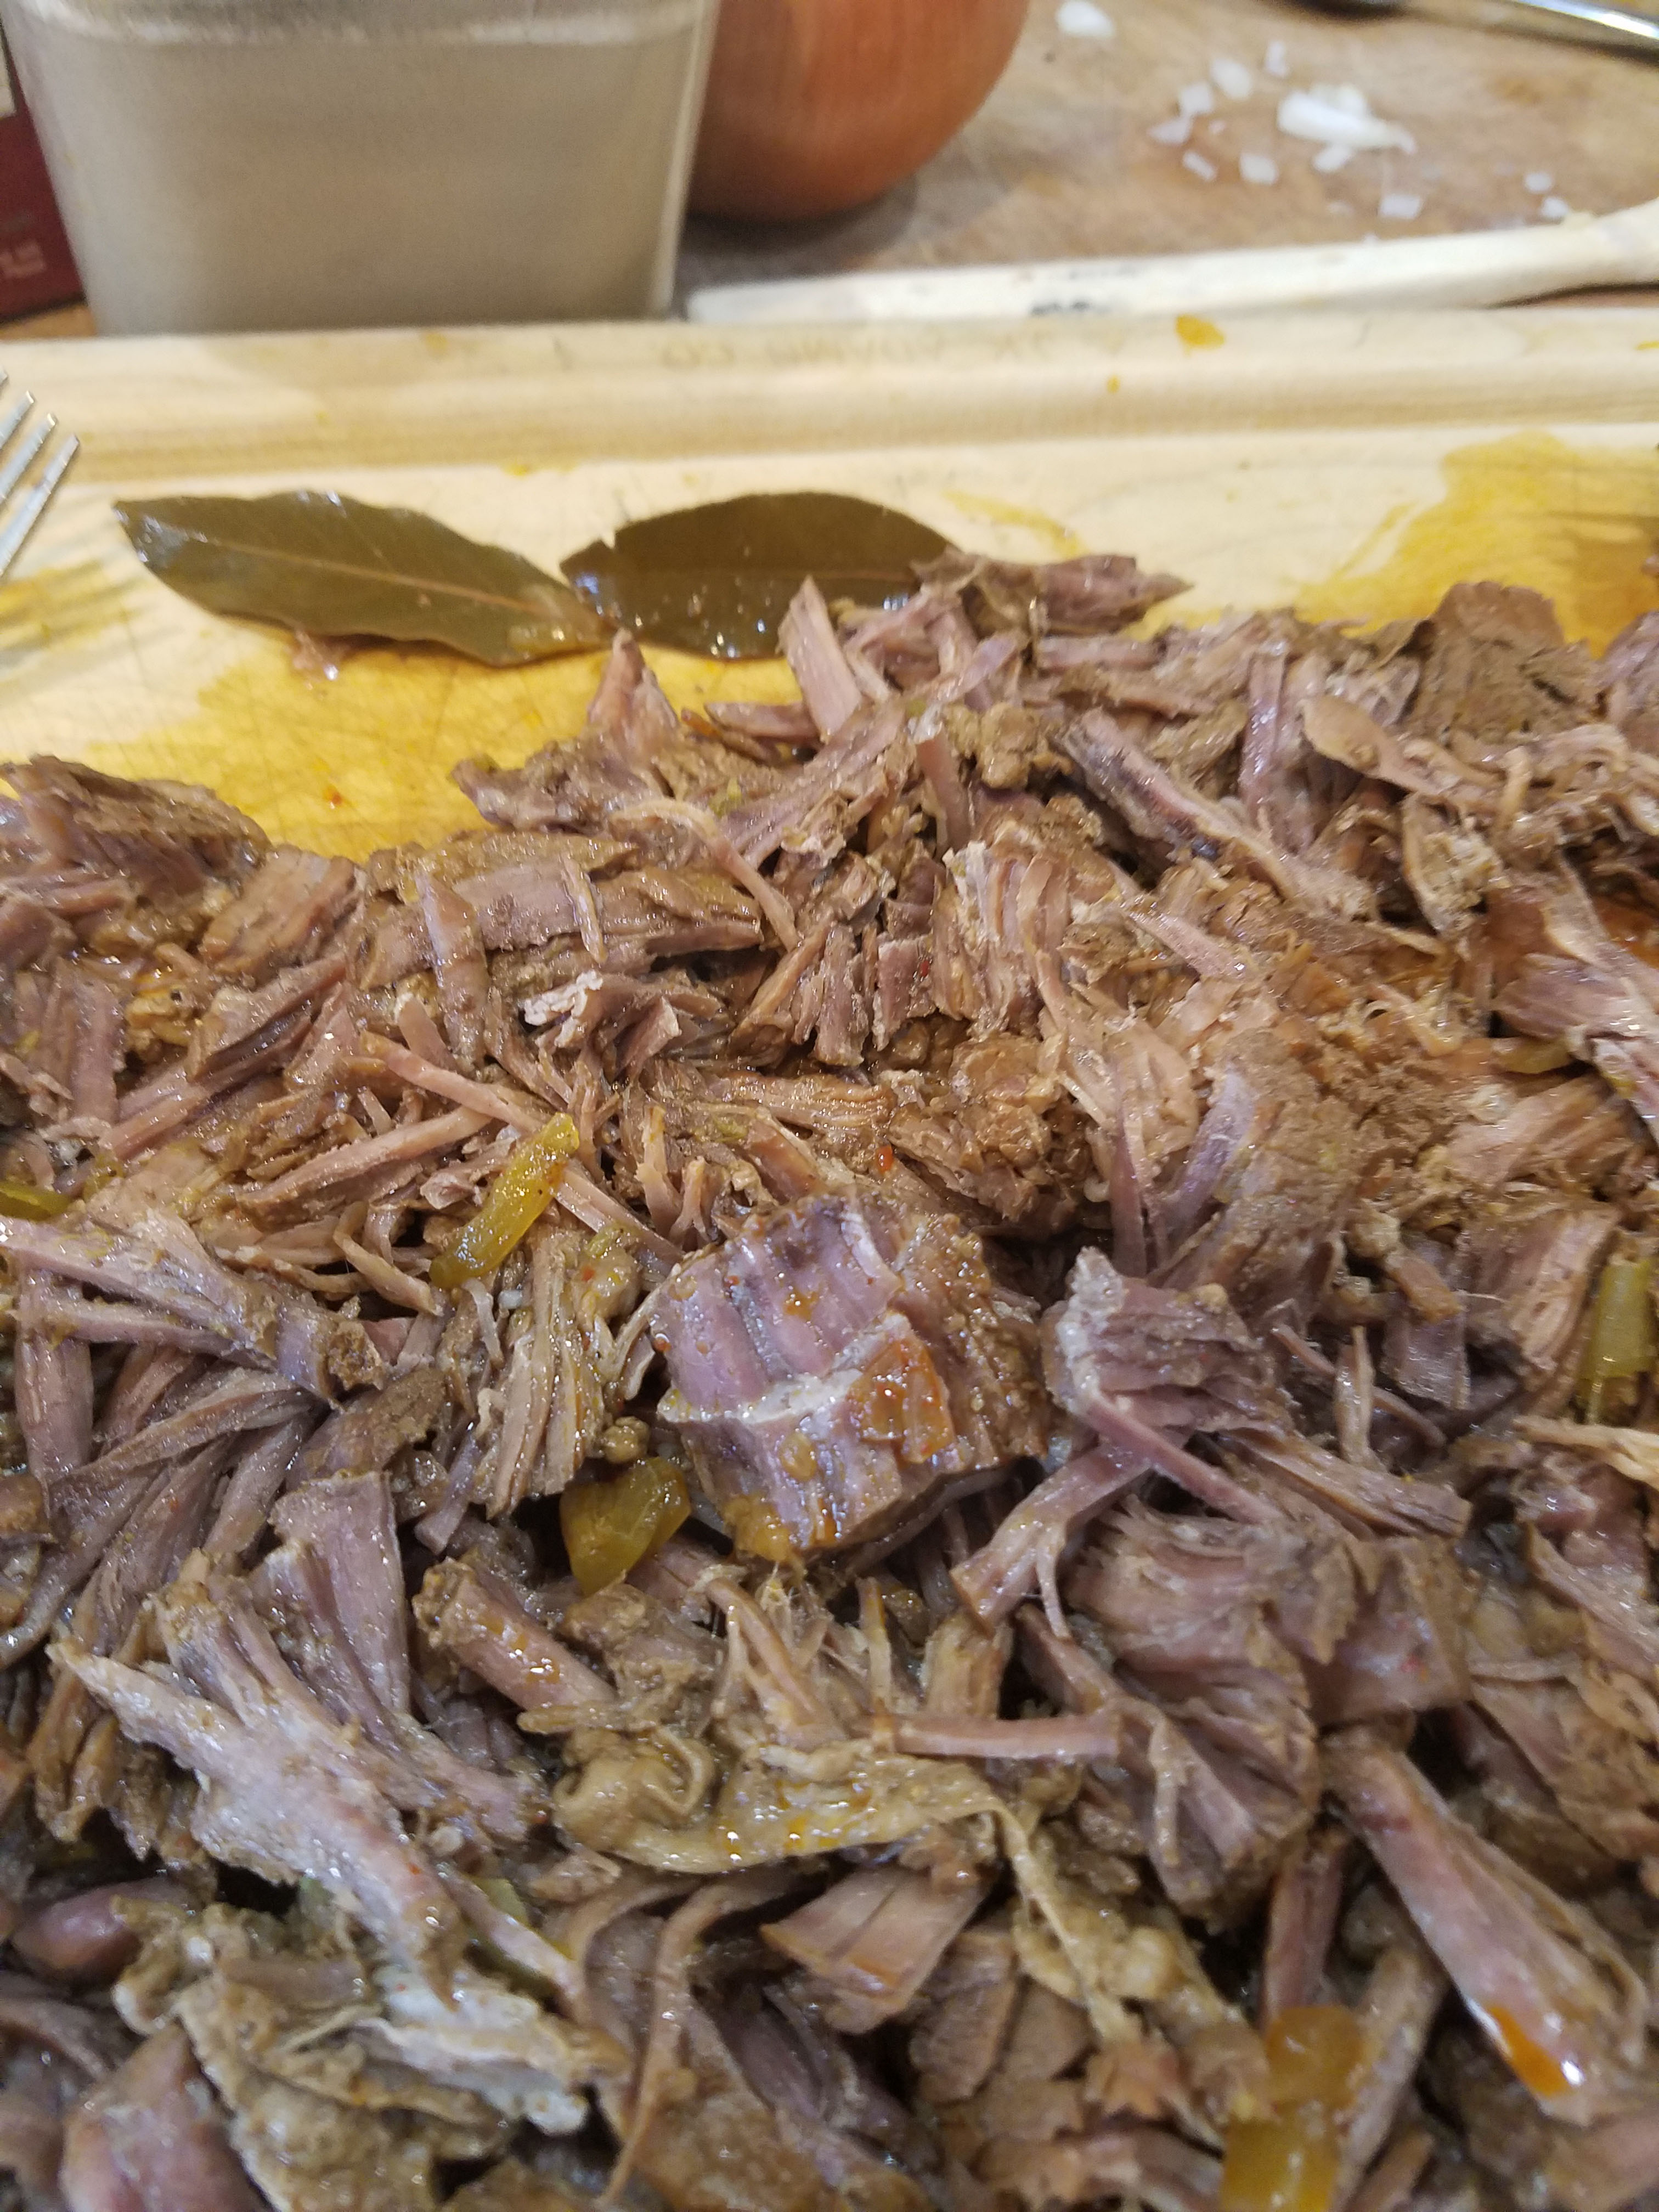 Instant Pot Mexican Shredded Beef